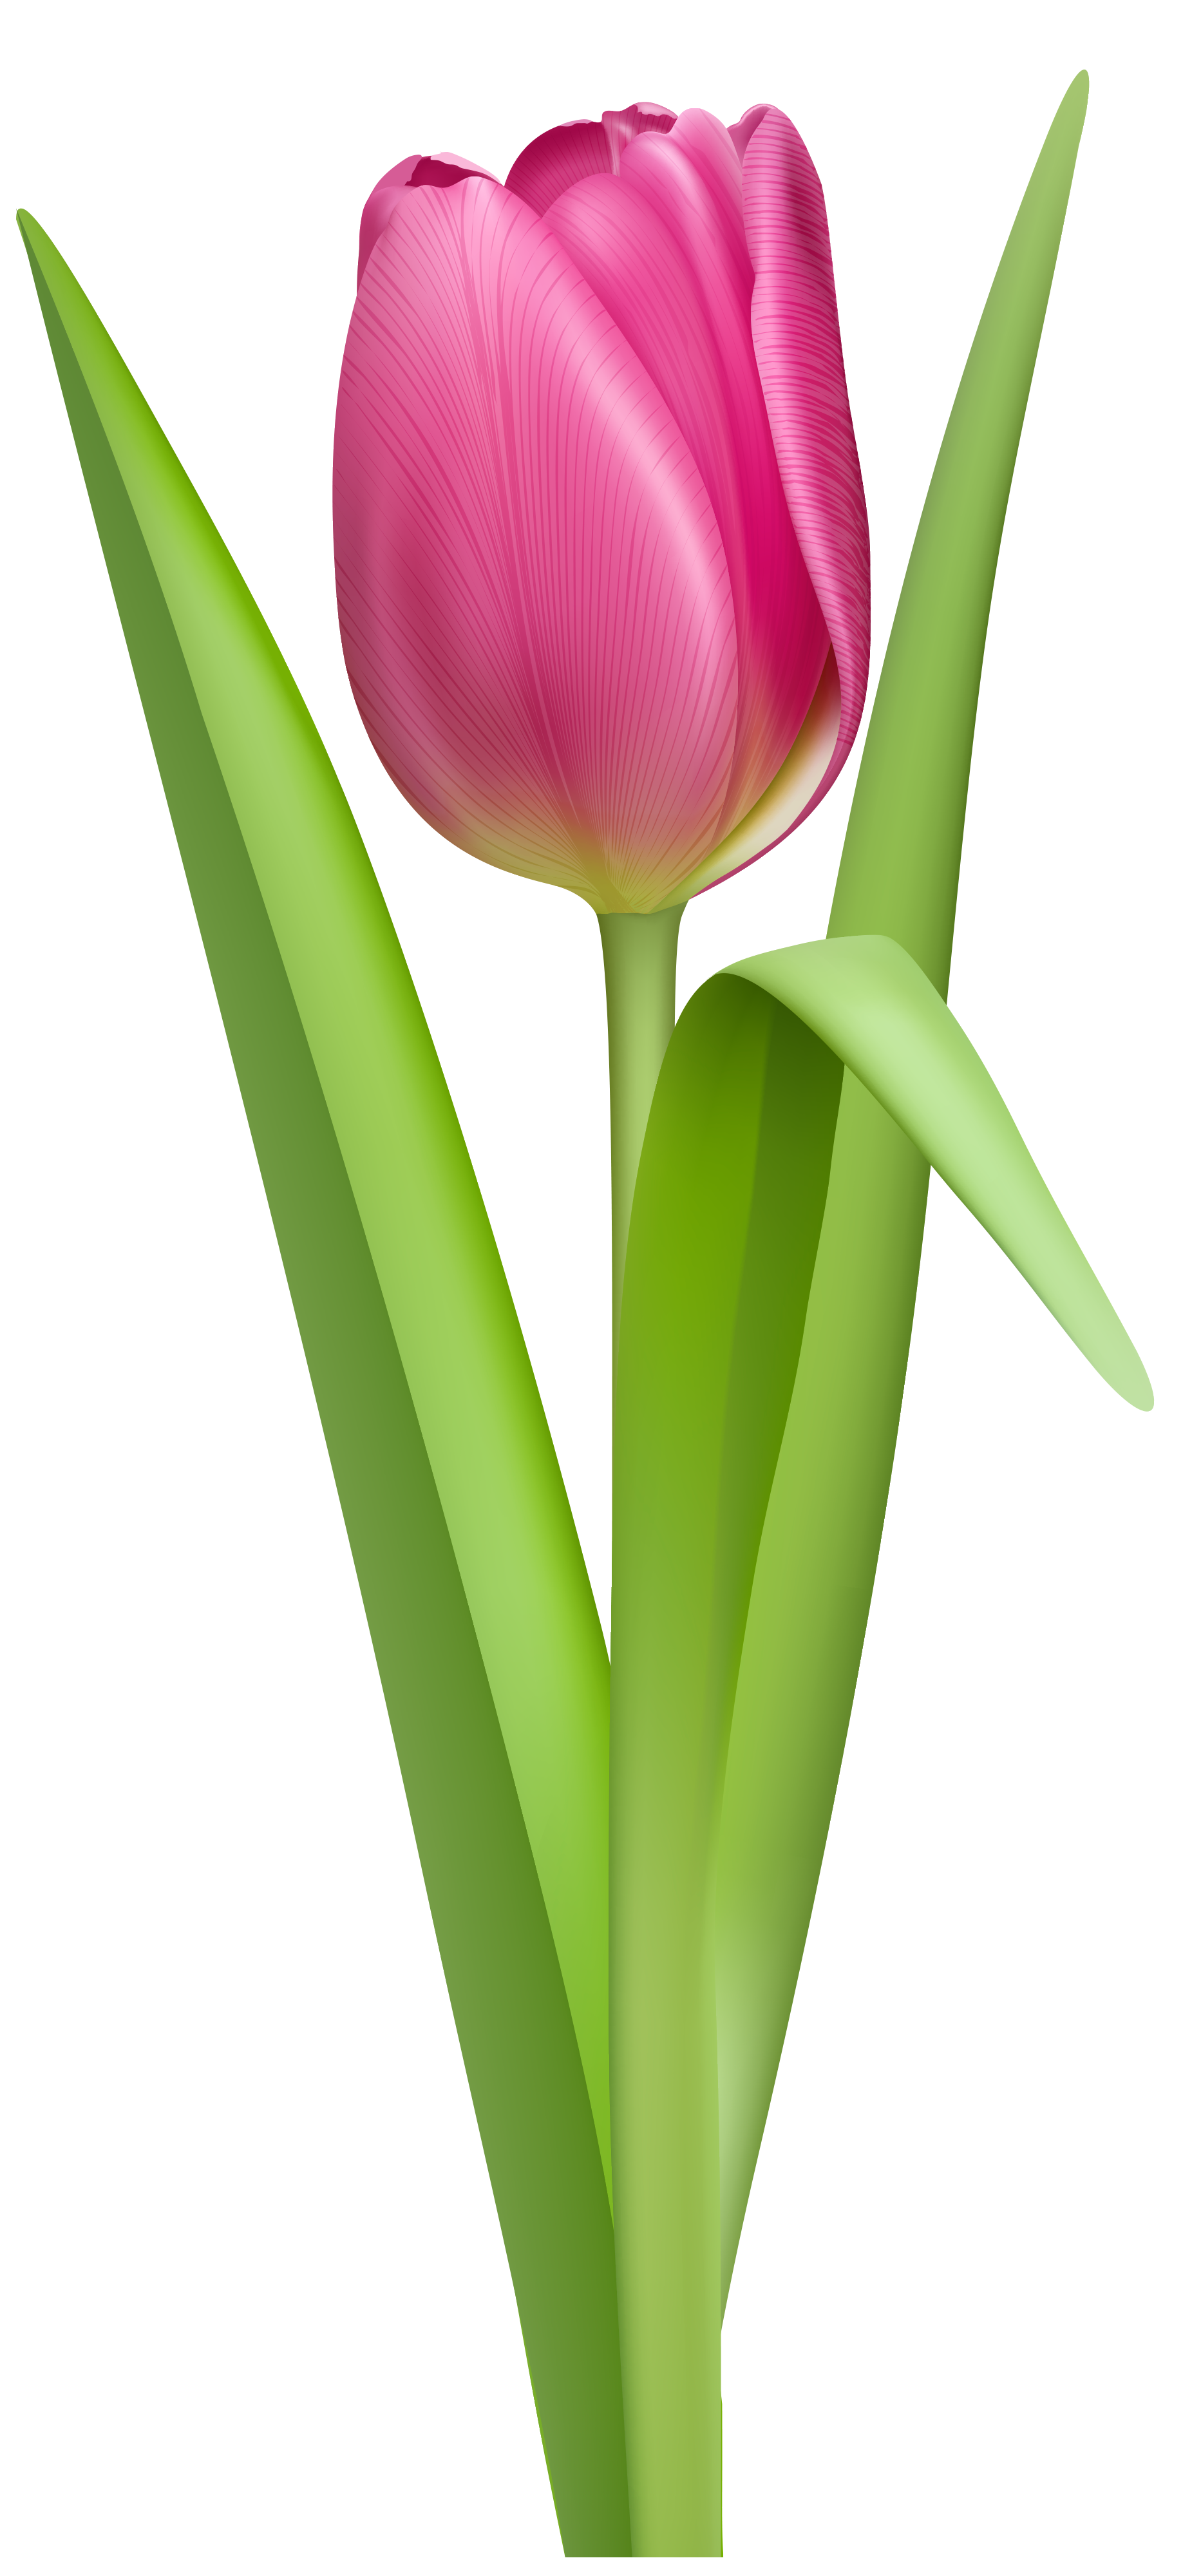 Flower clipart row. Tulip no background cliparts